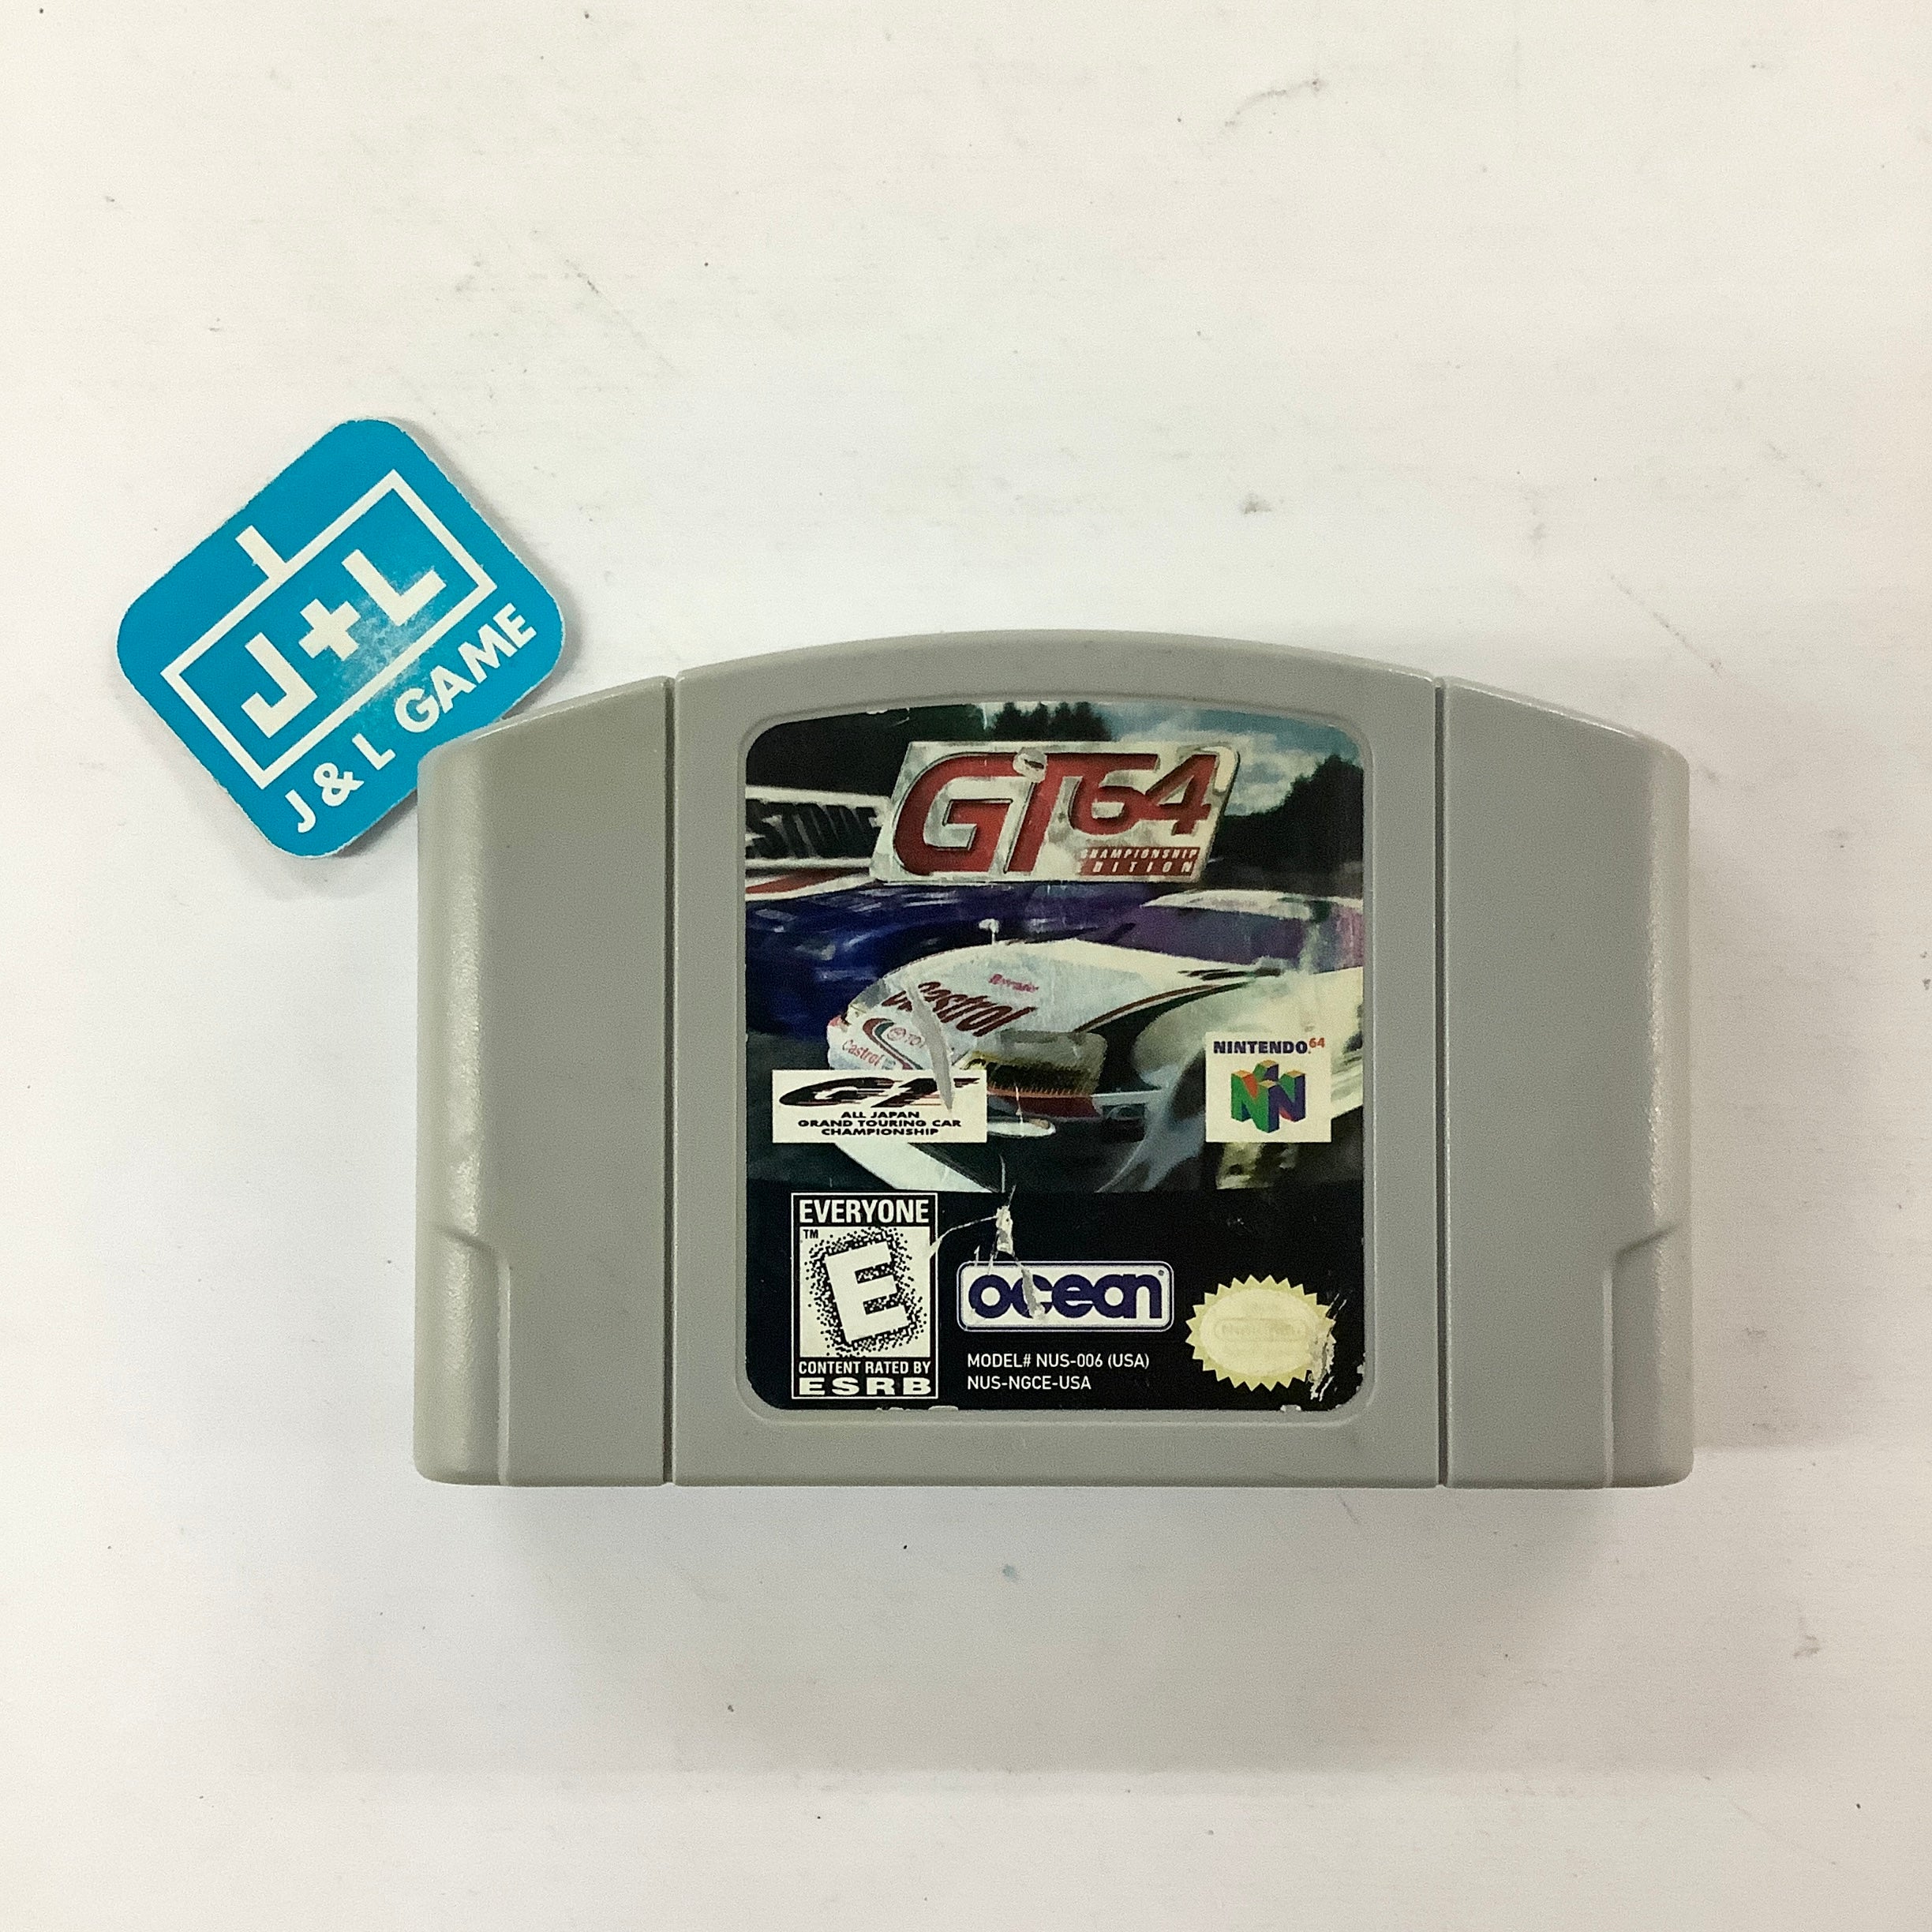 GT 64: Championship Edition - (N64) Nintendo 64 [Pre-Owned] Video Games Ocean   